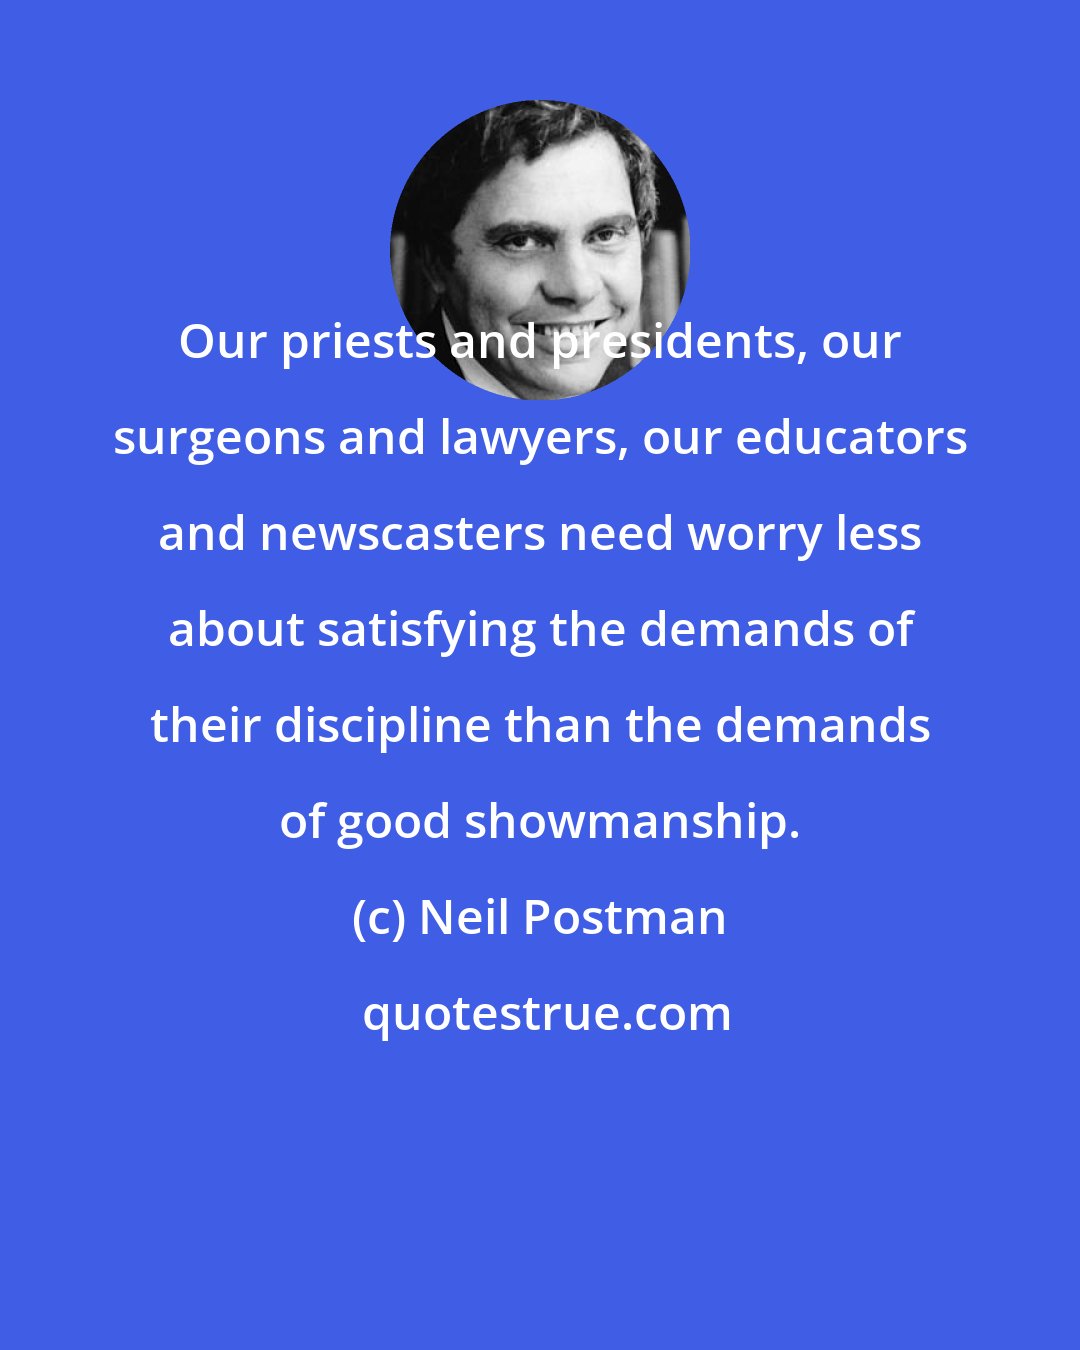 Neil Postman: Our priests and presidents, our surgeons and lawyers, our educators and newscasters need worry less about satisfying the demands of their discipline than the demands of good showmanship.